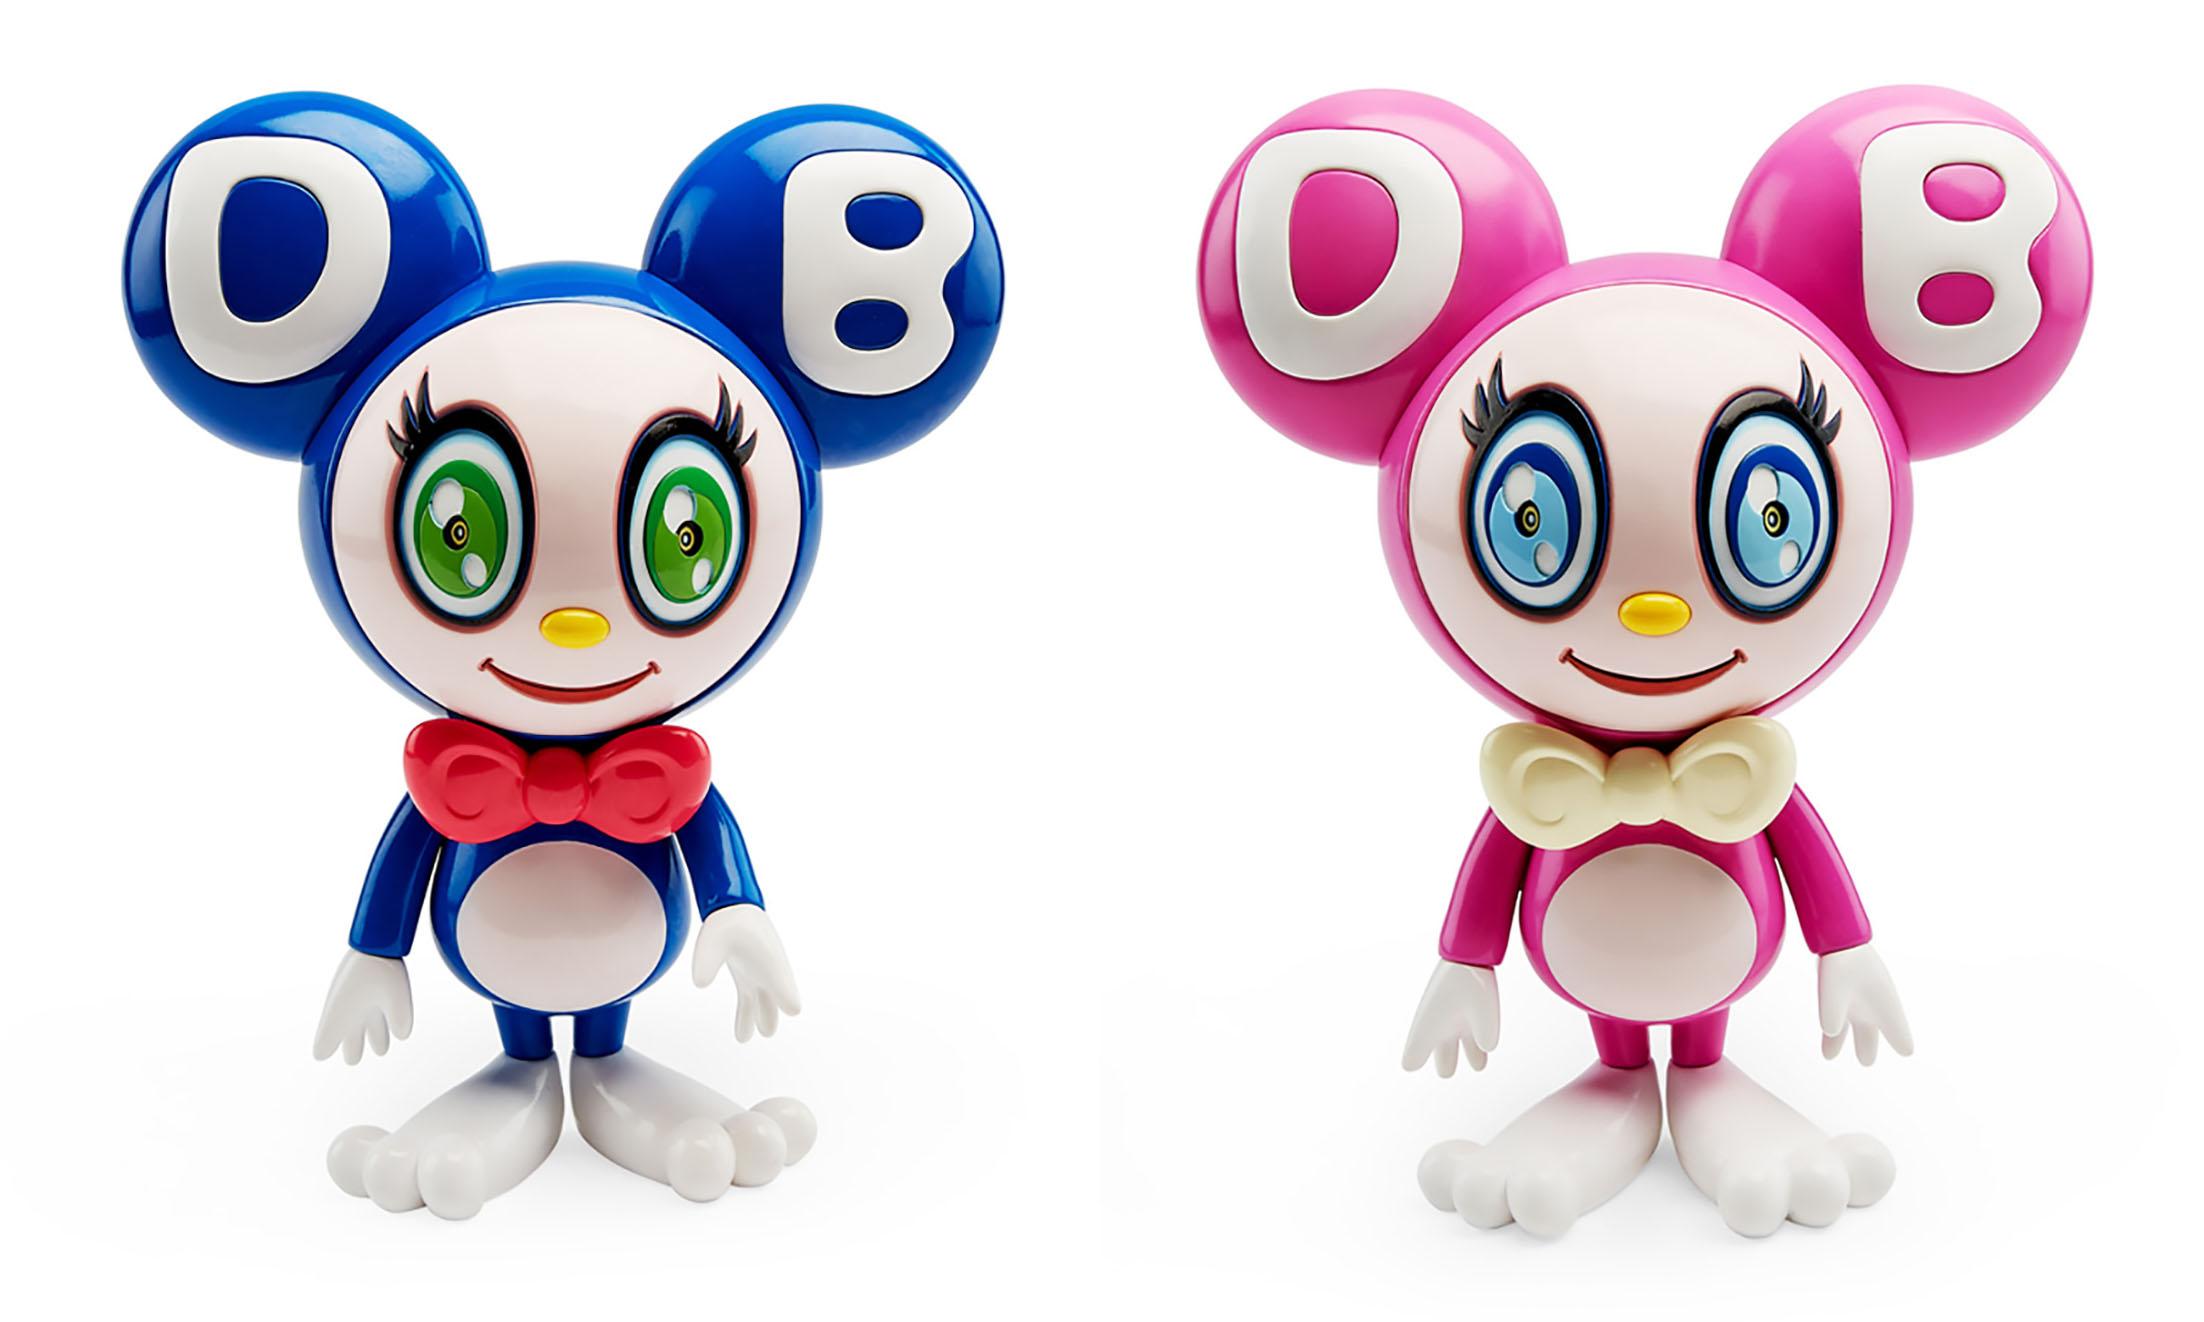 Takashi Murakami DOB-kun Figures 2019. Set of 2: Dark Blue & Fuscha: 
DOB-kun’s name, defined in his rounded ears and face, is the first three letters of an improvised phrase that is a nonsensical combination of “dobojide dobojide (why, why?)” from